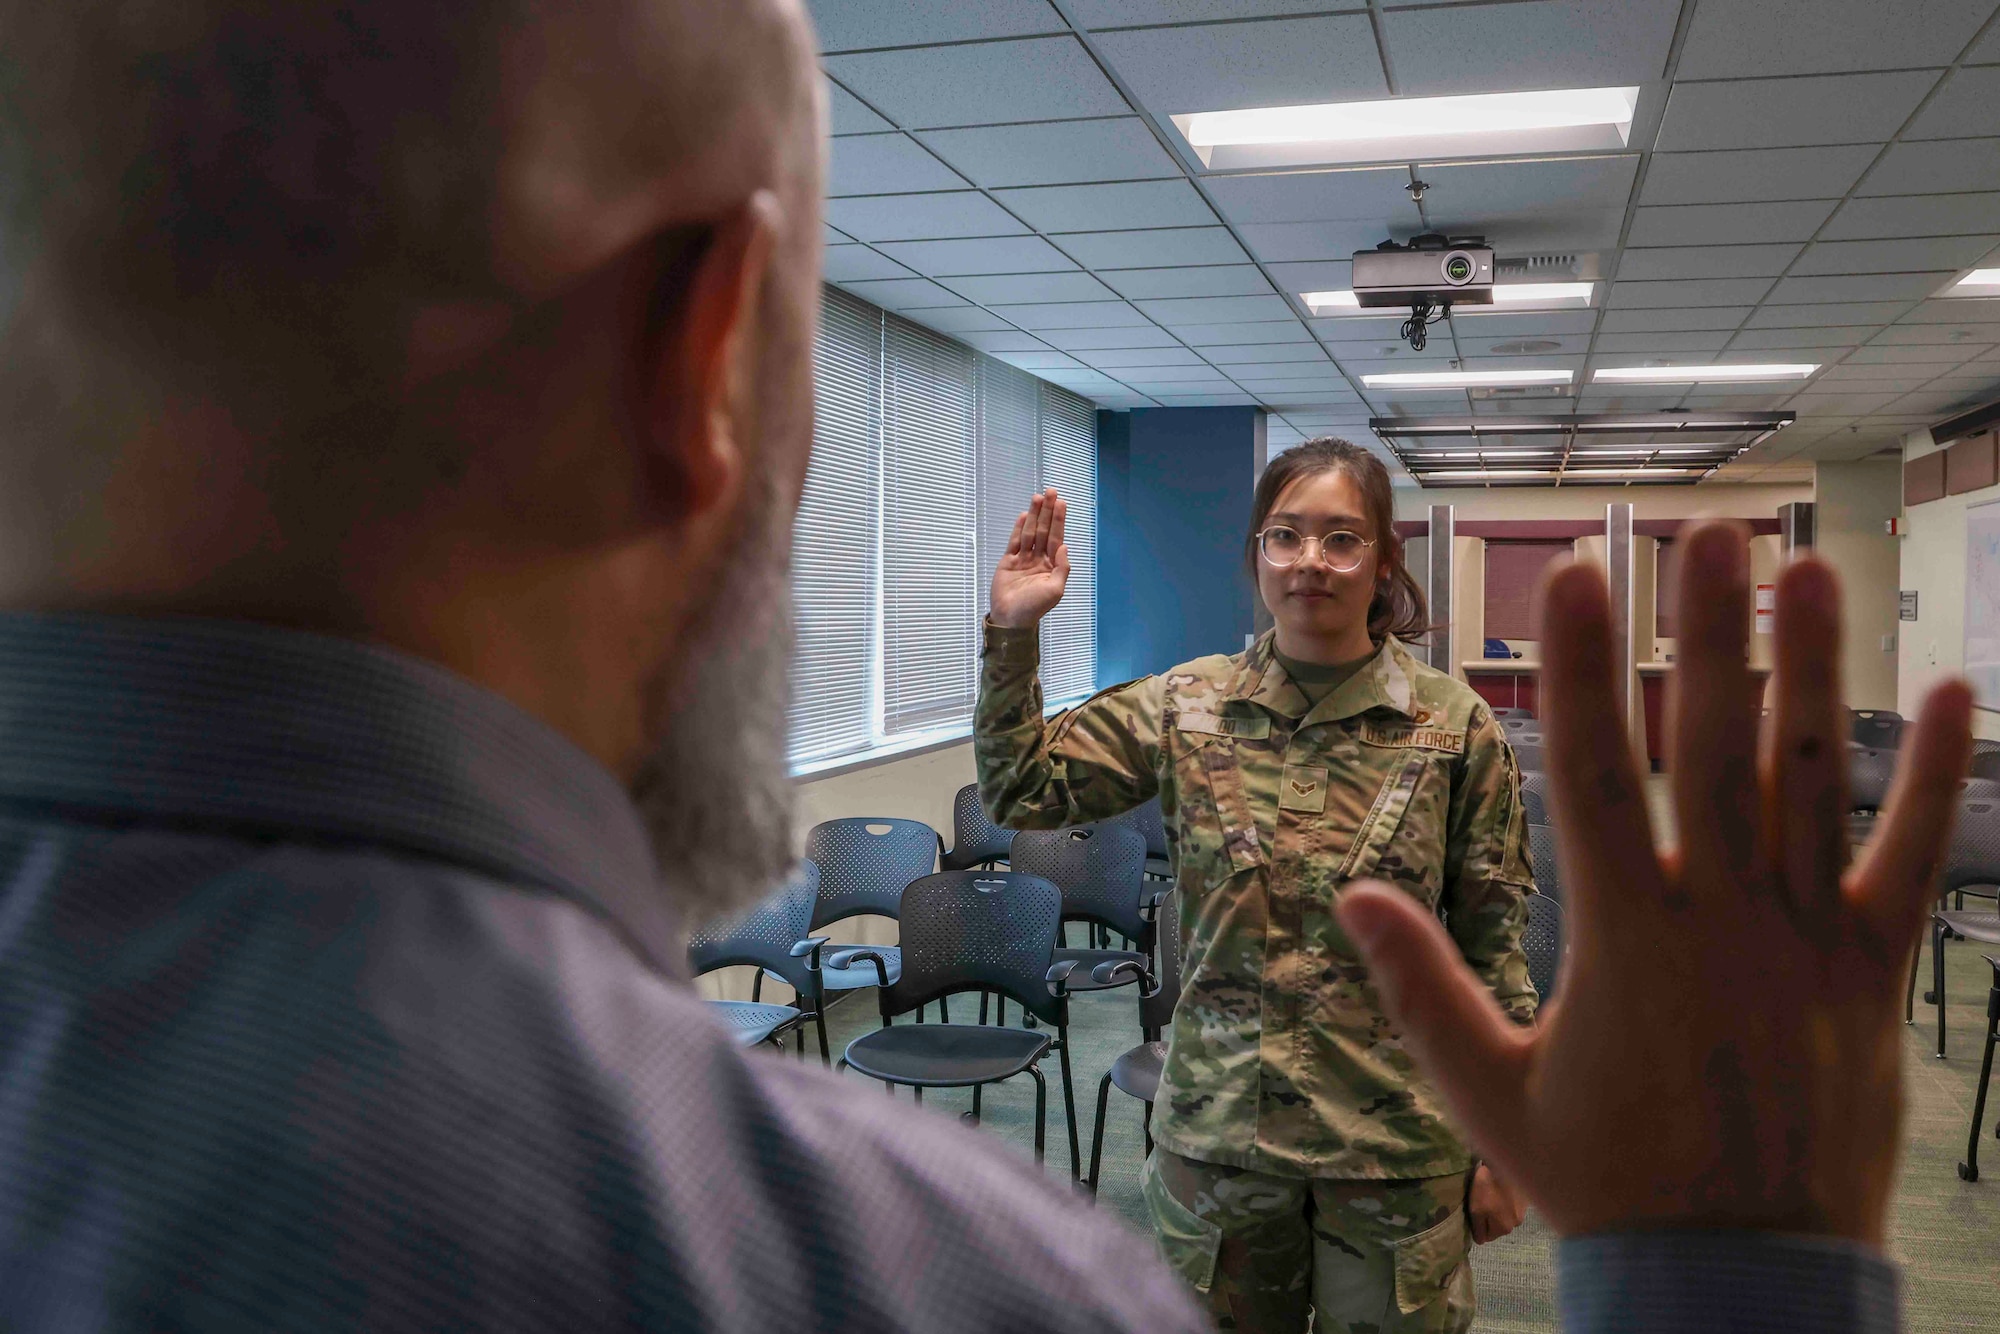 U.S. Air Force Airman 1st Class Trieu Do, 9th Force Support Squadron food service specialist, raises her hand to recite the Oath of Allegiance at the United States Citizenship and Immigration Services field office in Sacramento, California, Nov. 15, 2023.